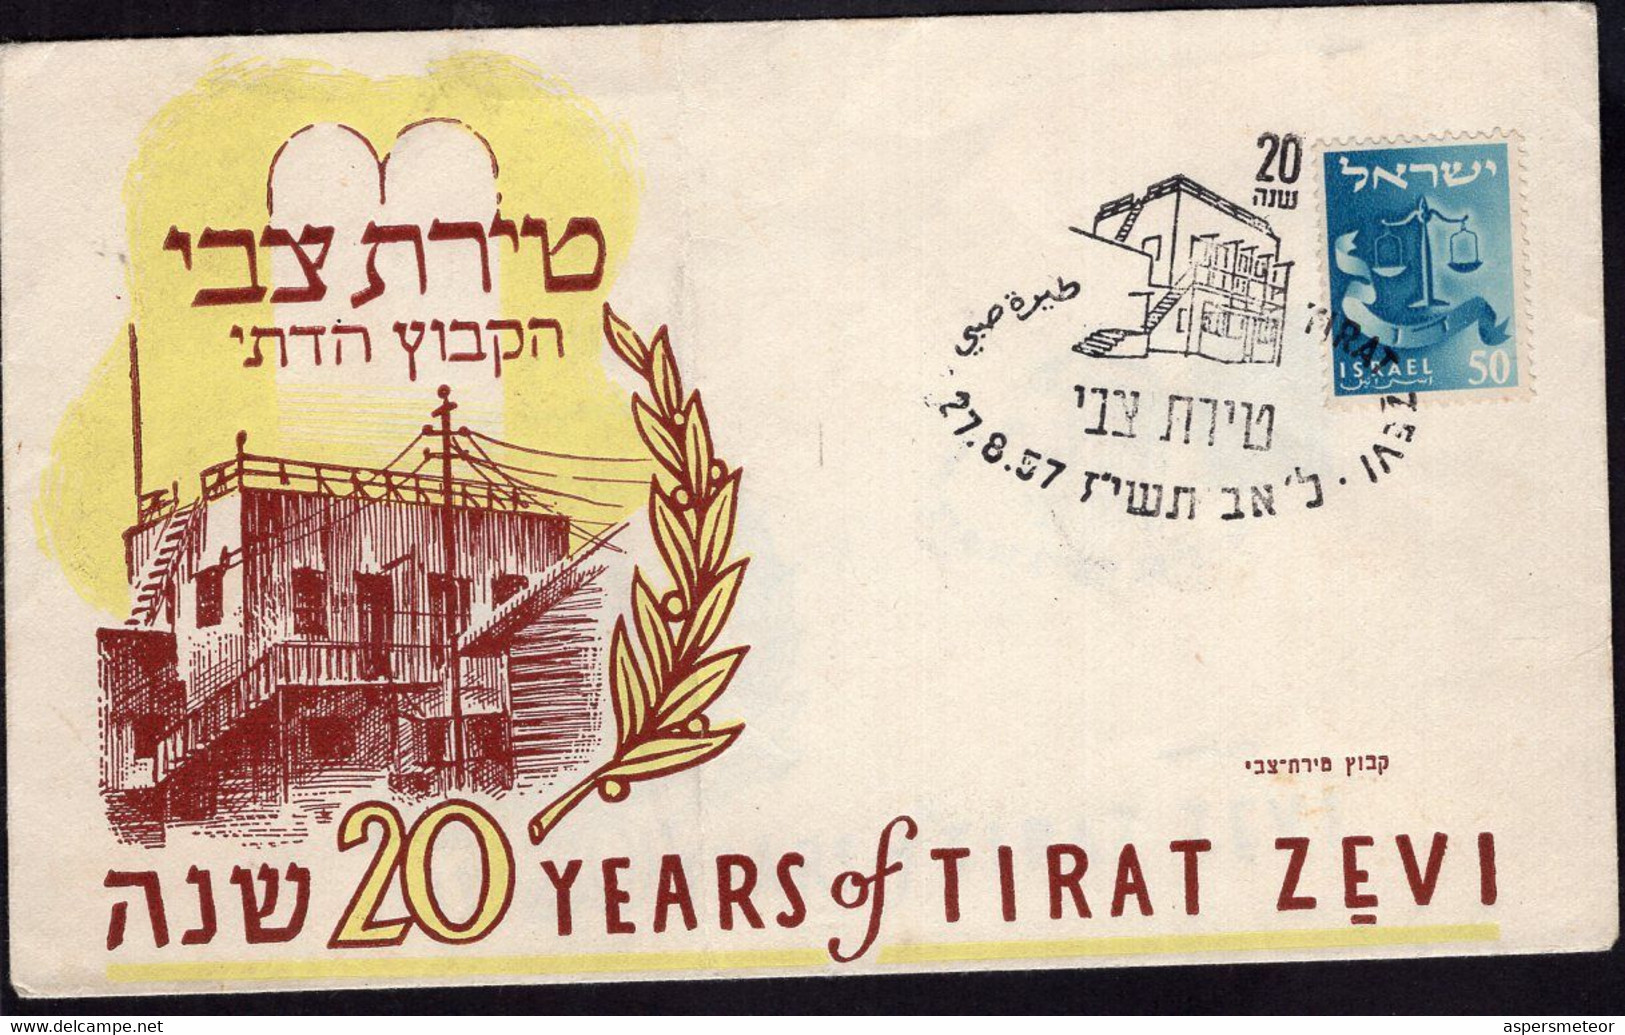 Israel - FDC - 1957 - 20 Years Of Trat Zevi - A1RR2 - FDC